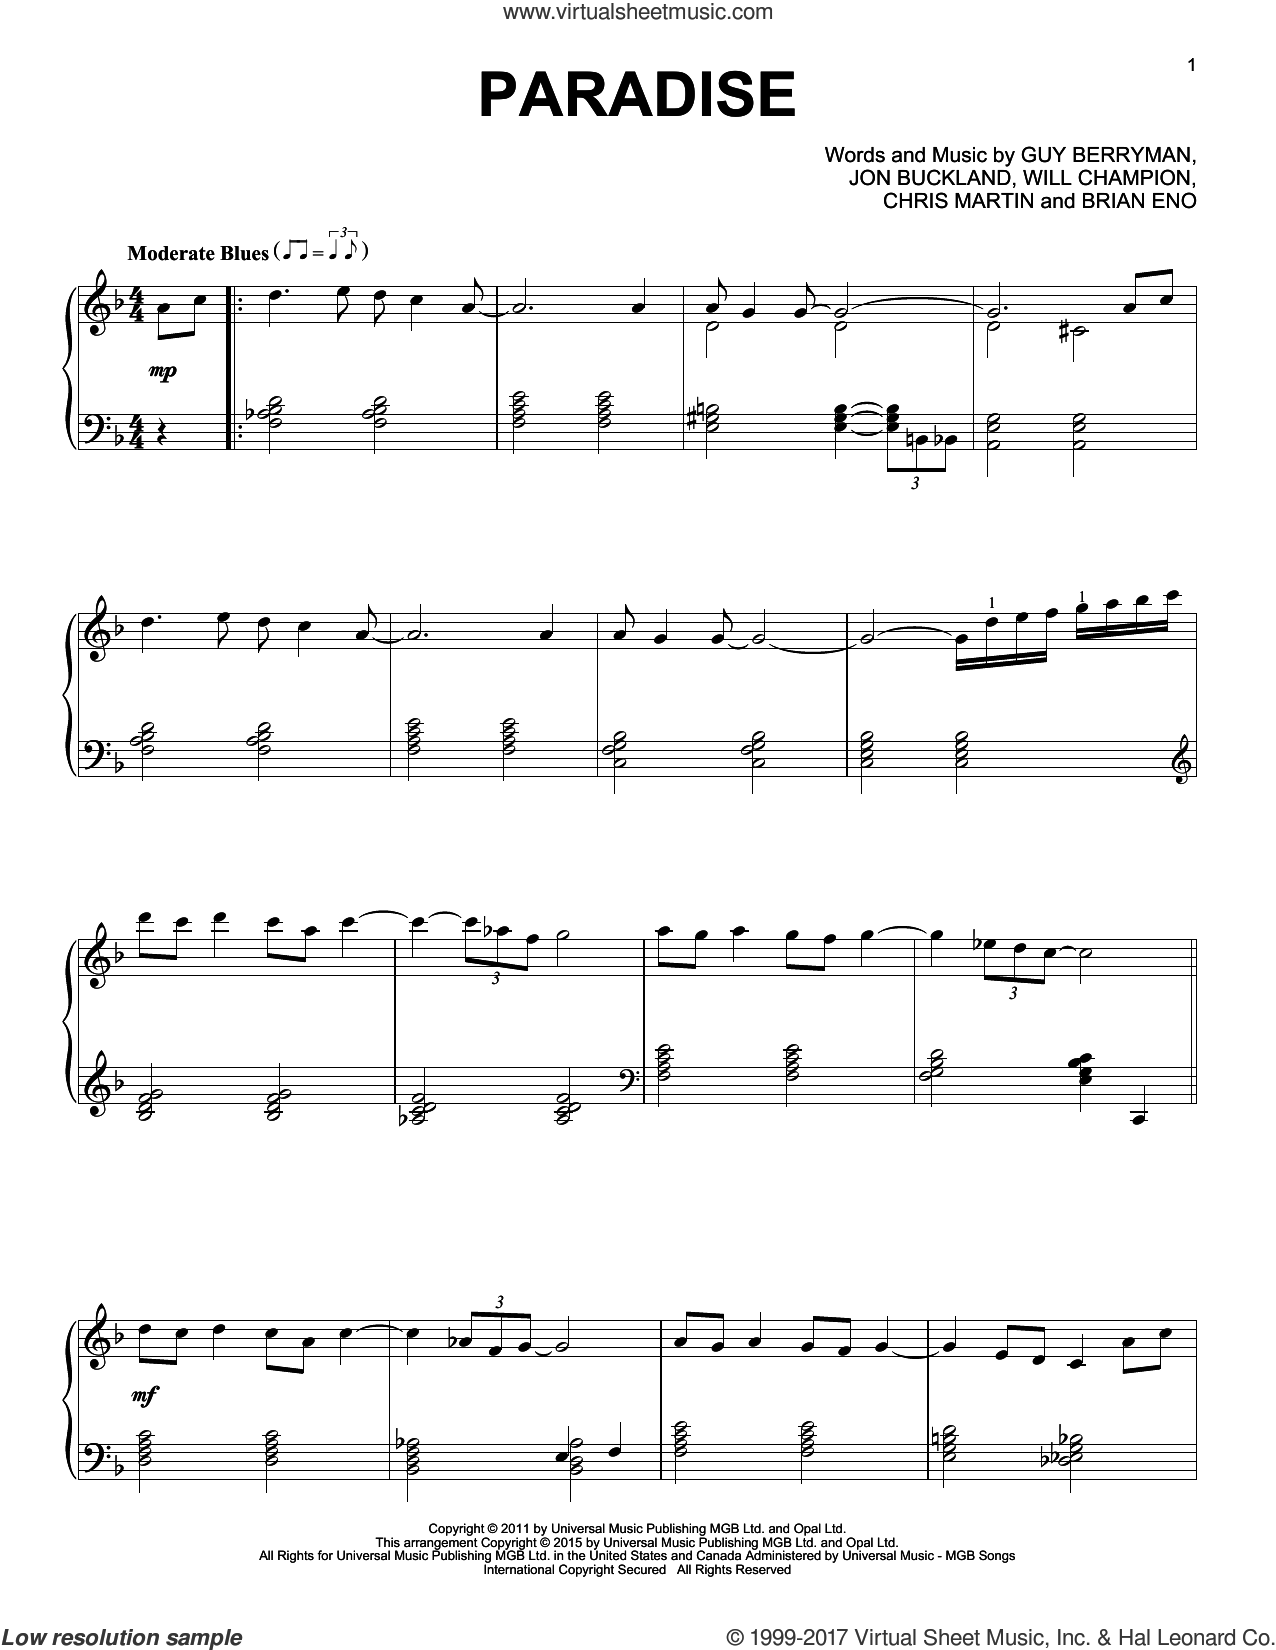 Coldplay - Paradise [Jazz version] sheet music for piano solo